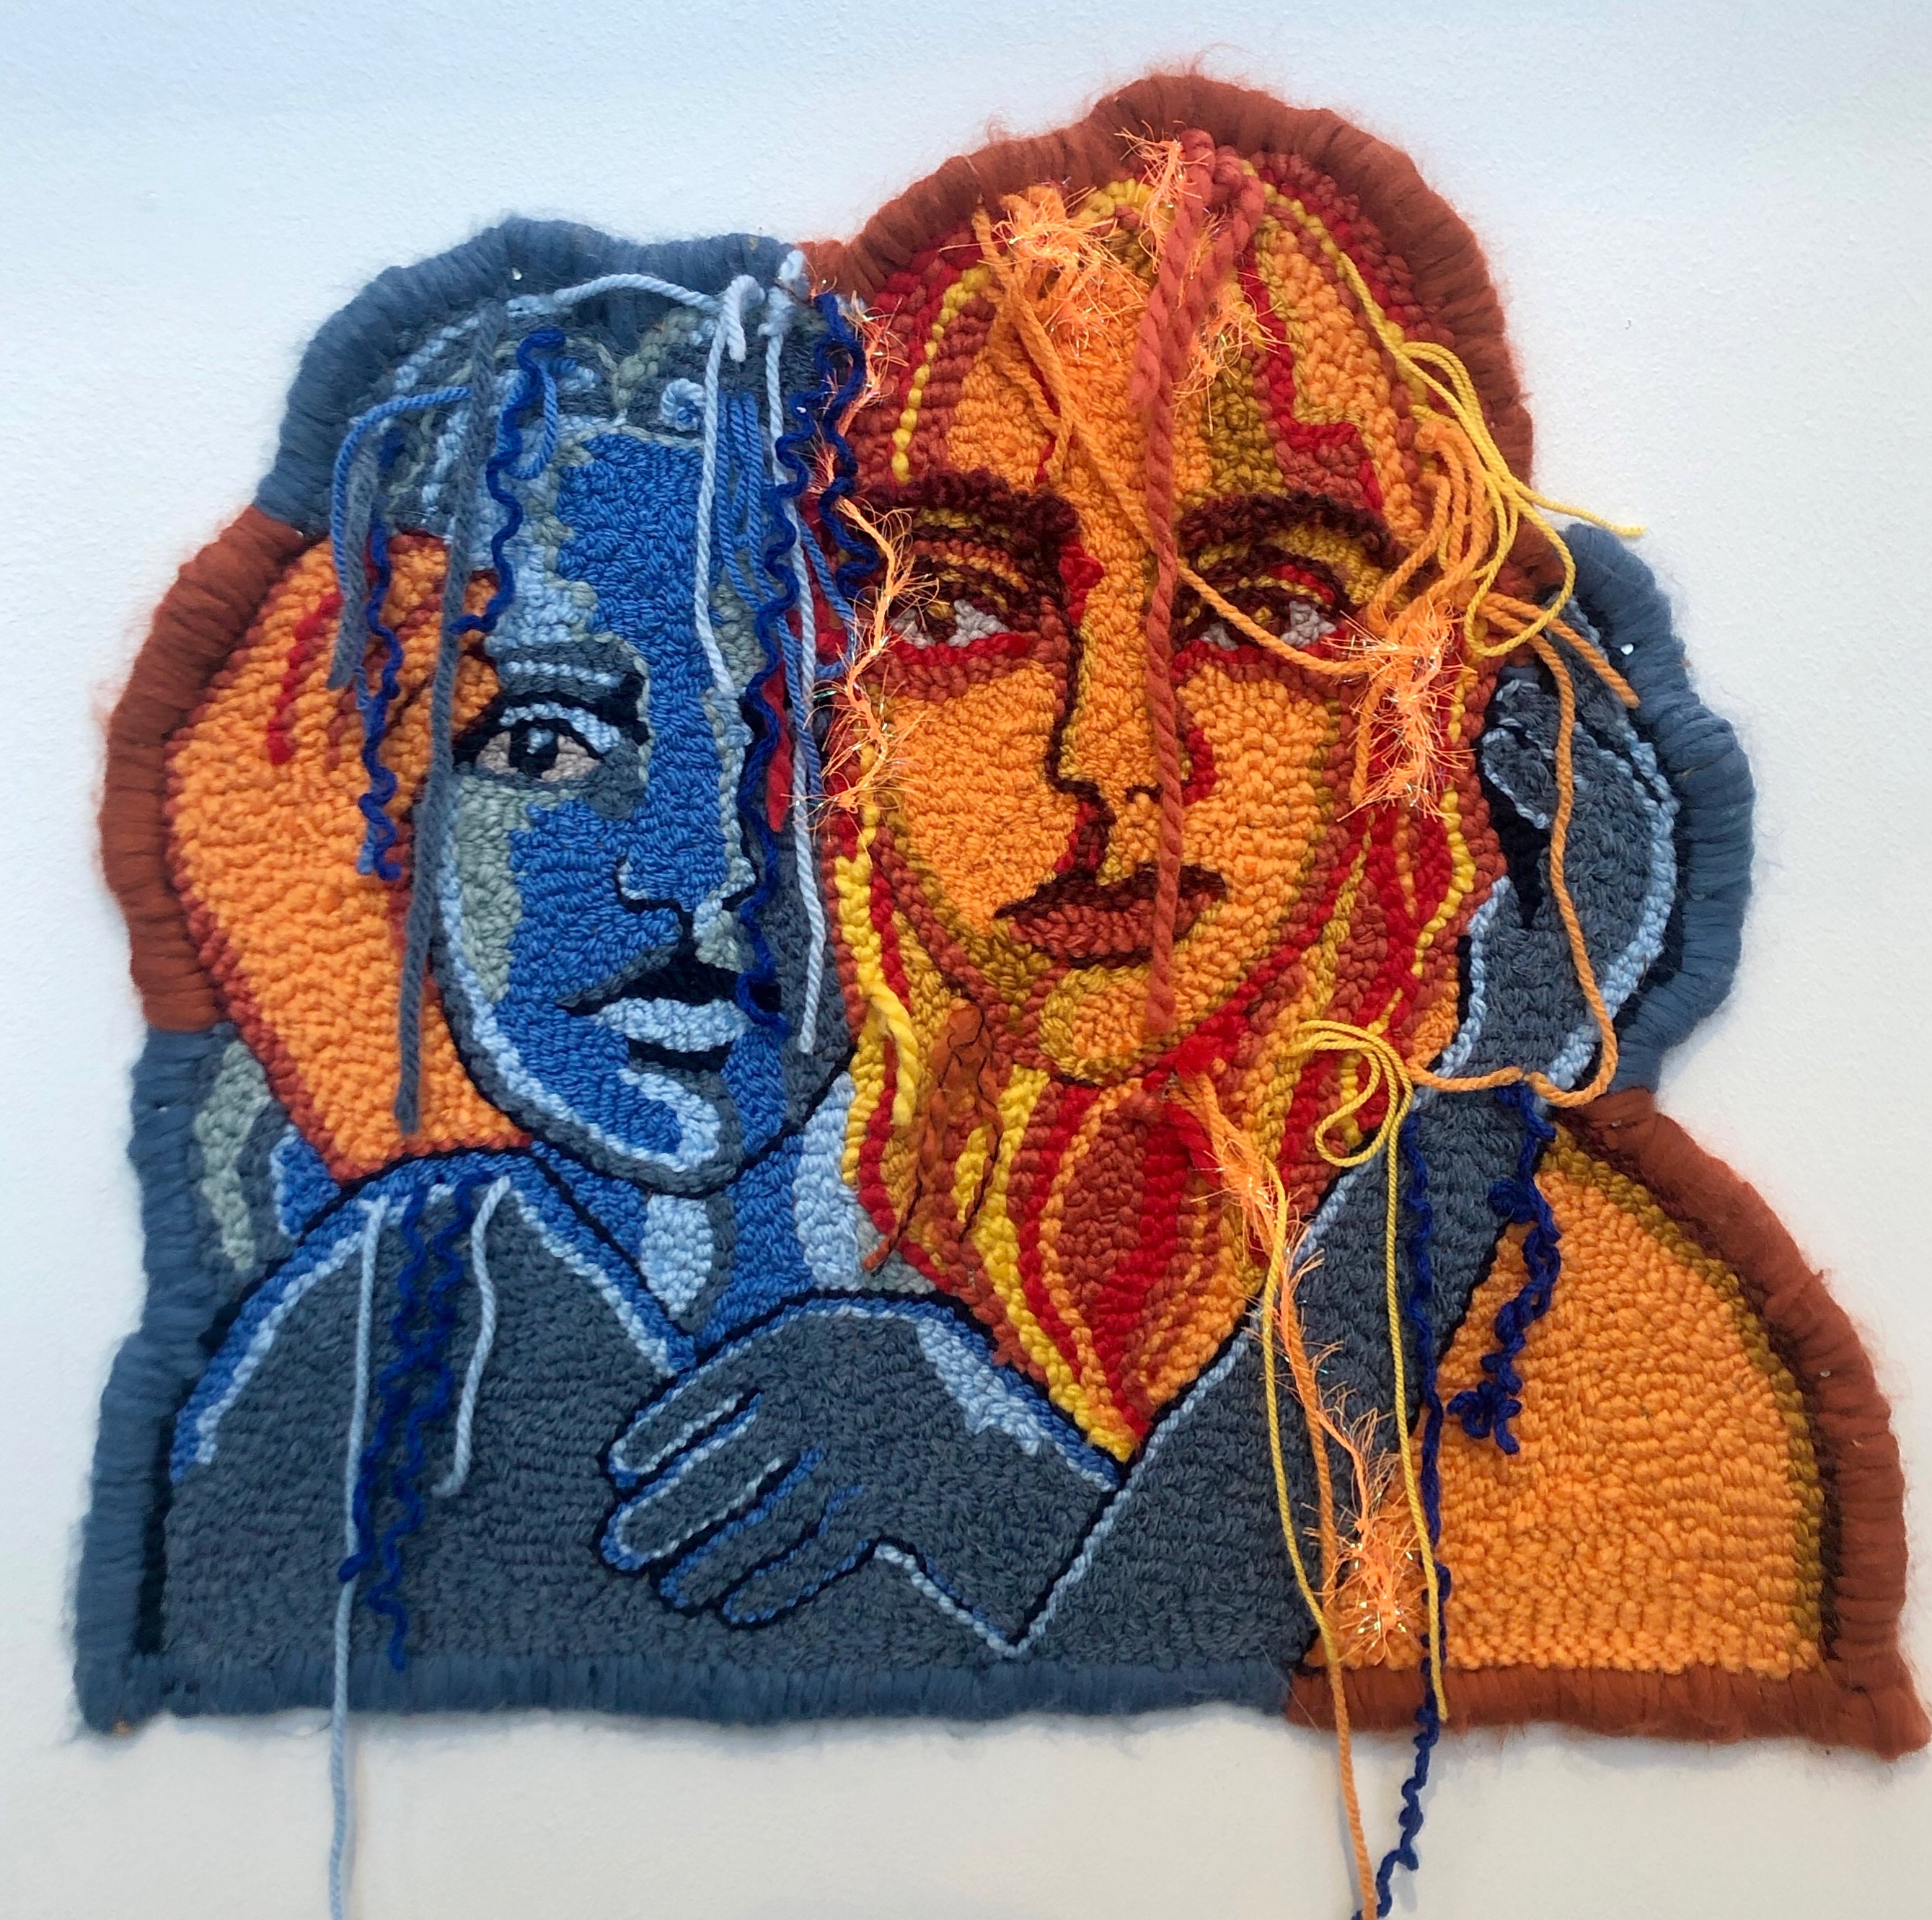 textile art by Selby Hurst Inglefield of 2 people, one in blues and the other in yellow and orange tones